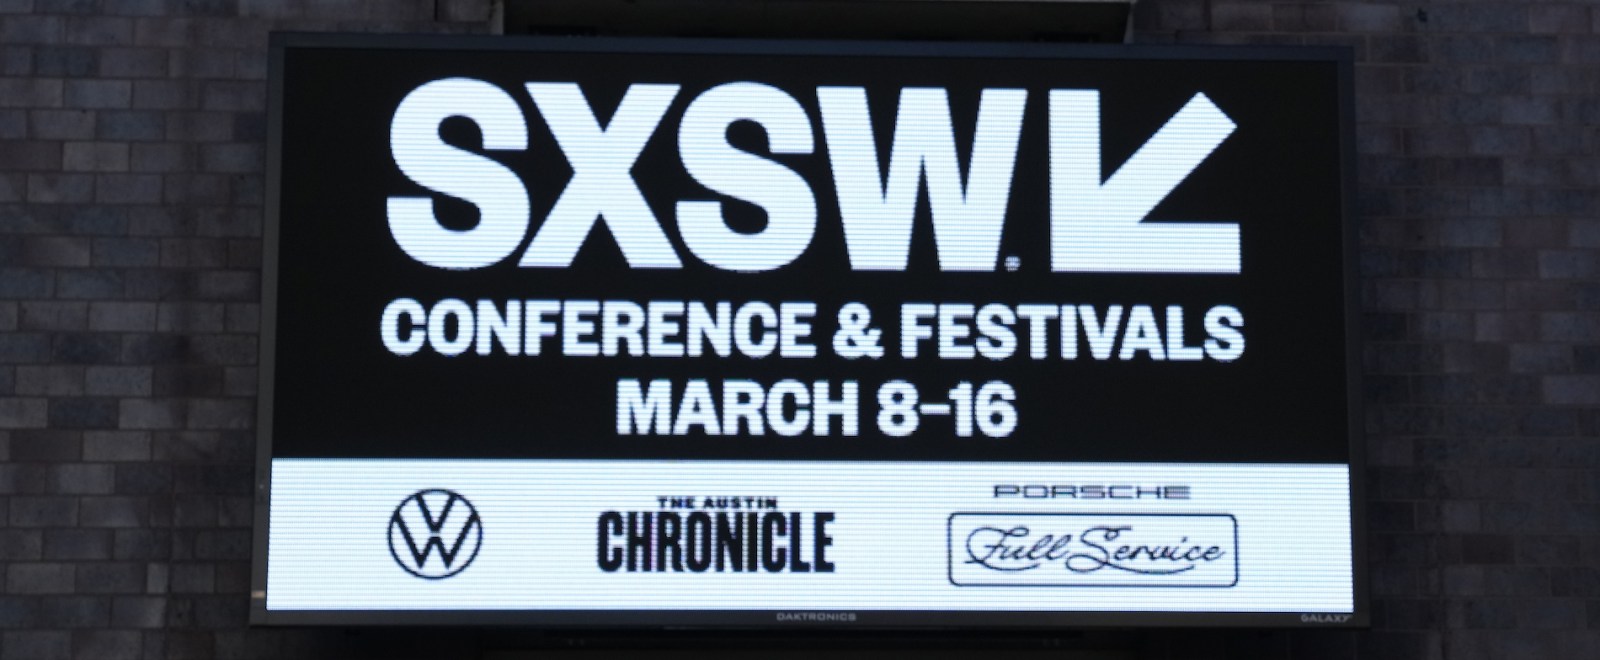 SXSW Issues A Statement After A Person Was Killed In An Austin Hit-And-Run